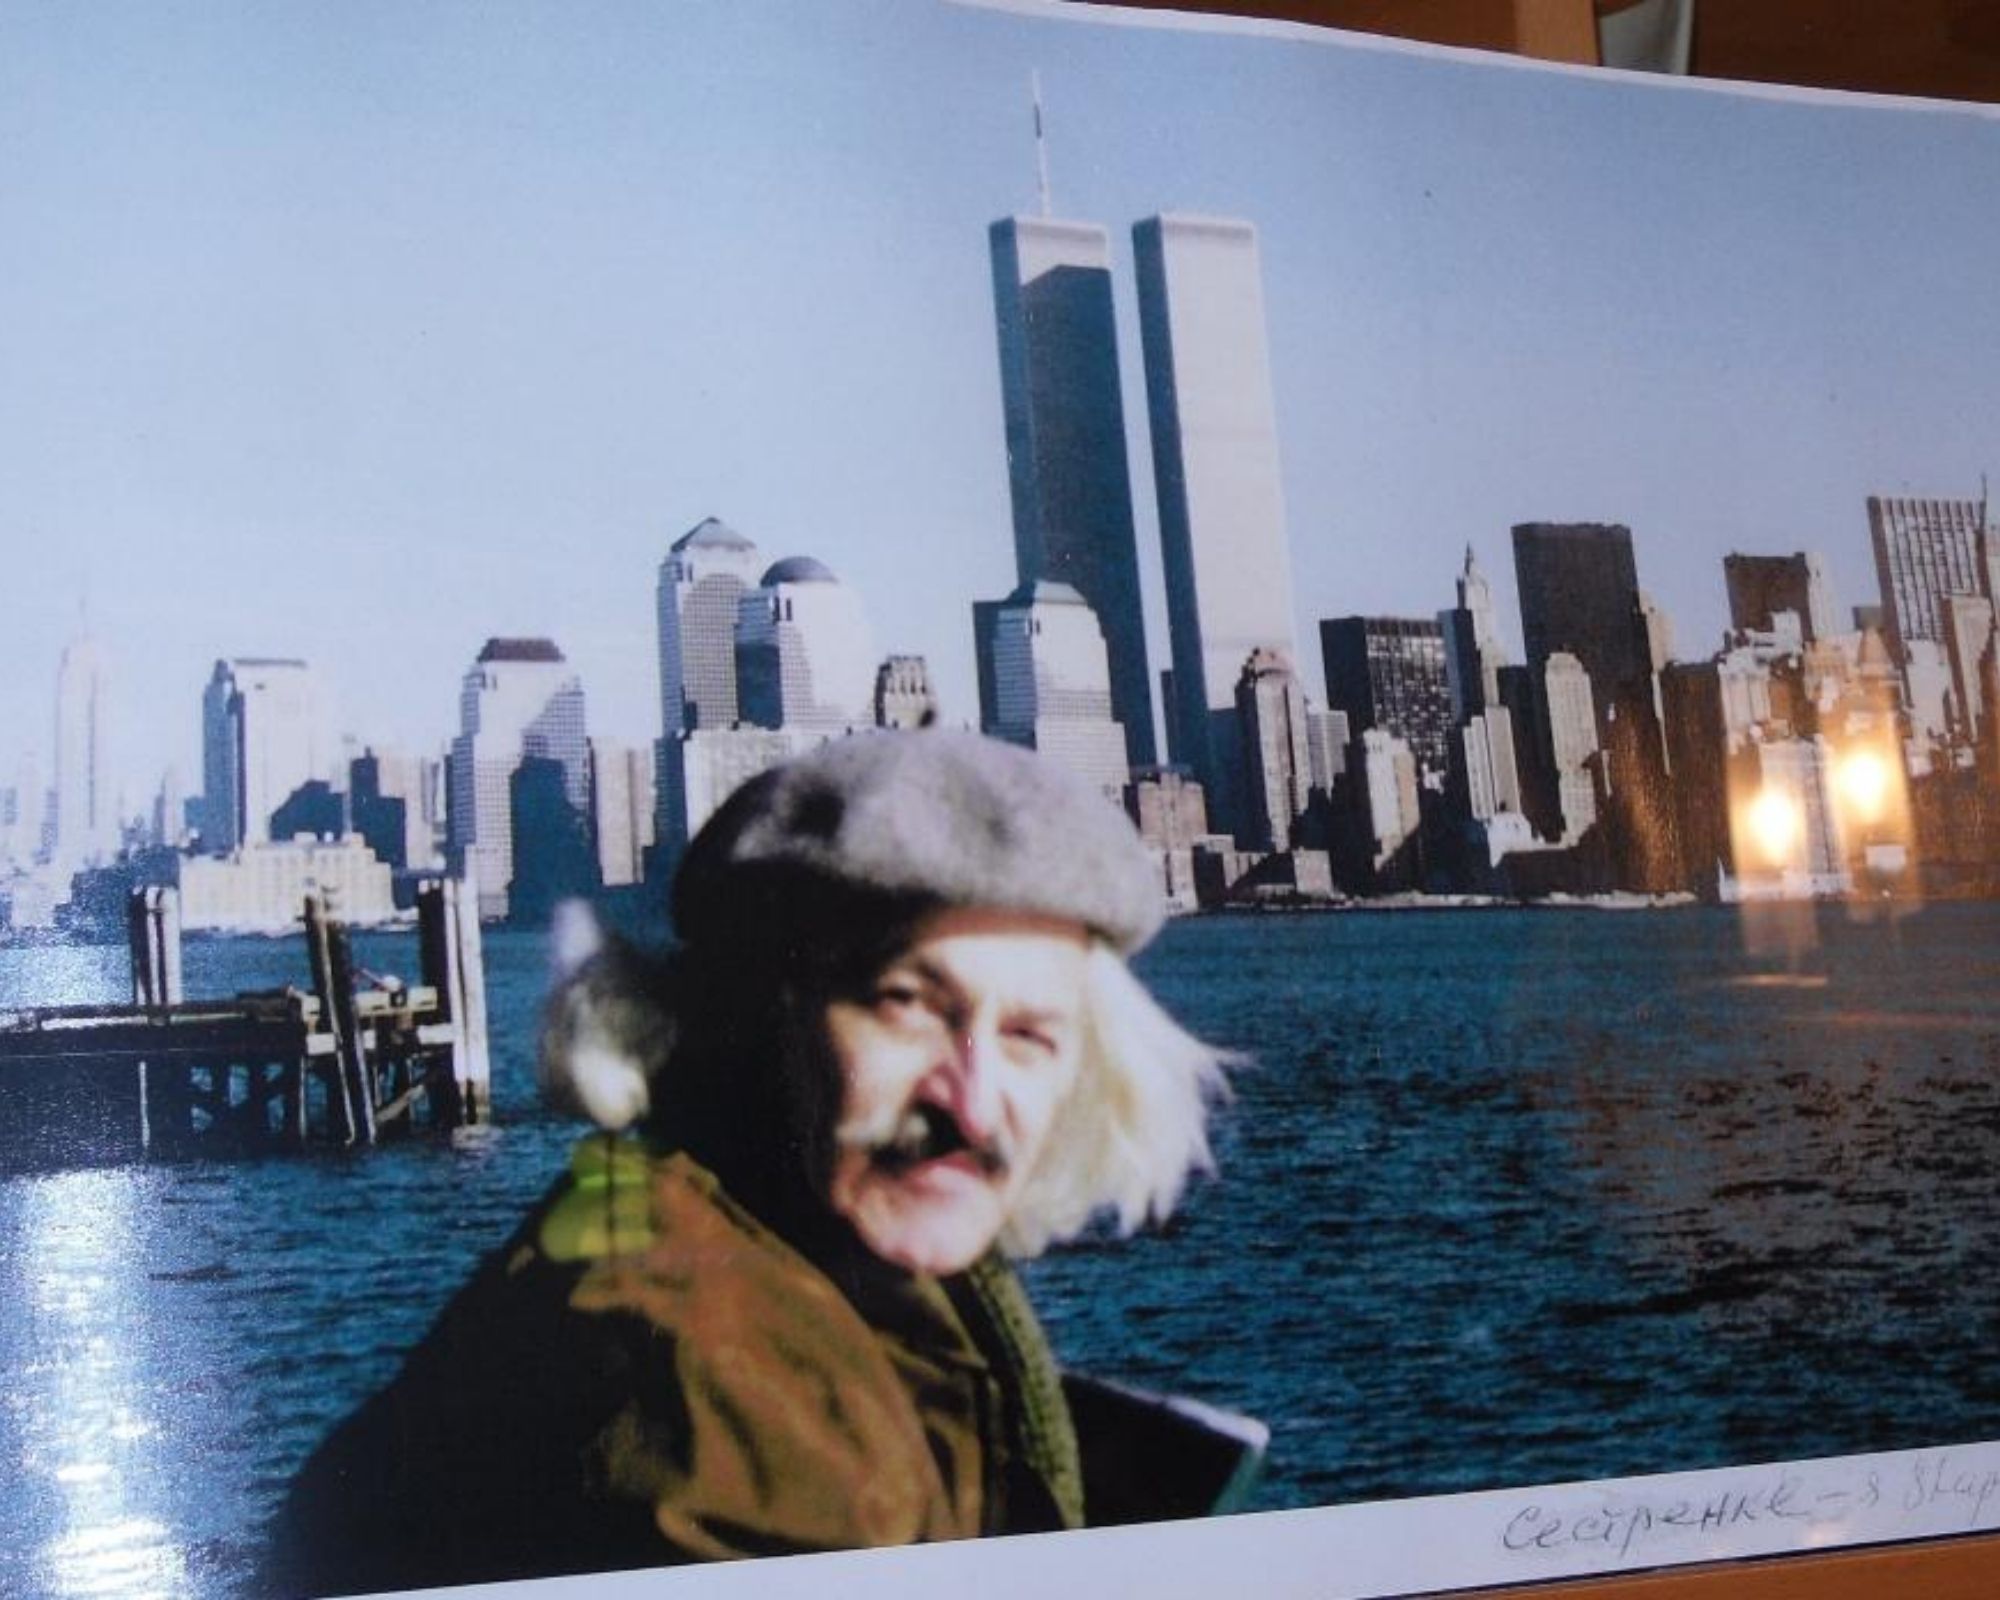 A gray-haired and mustached man with a brown jacket and gray cap poses in front of the lower Manhattan skyline, with the Twin Towers visible in the forefront